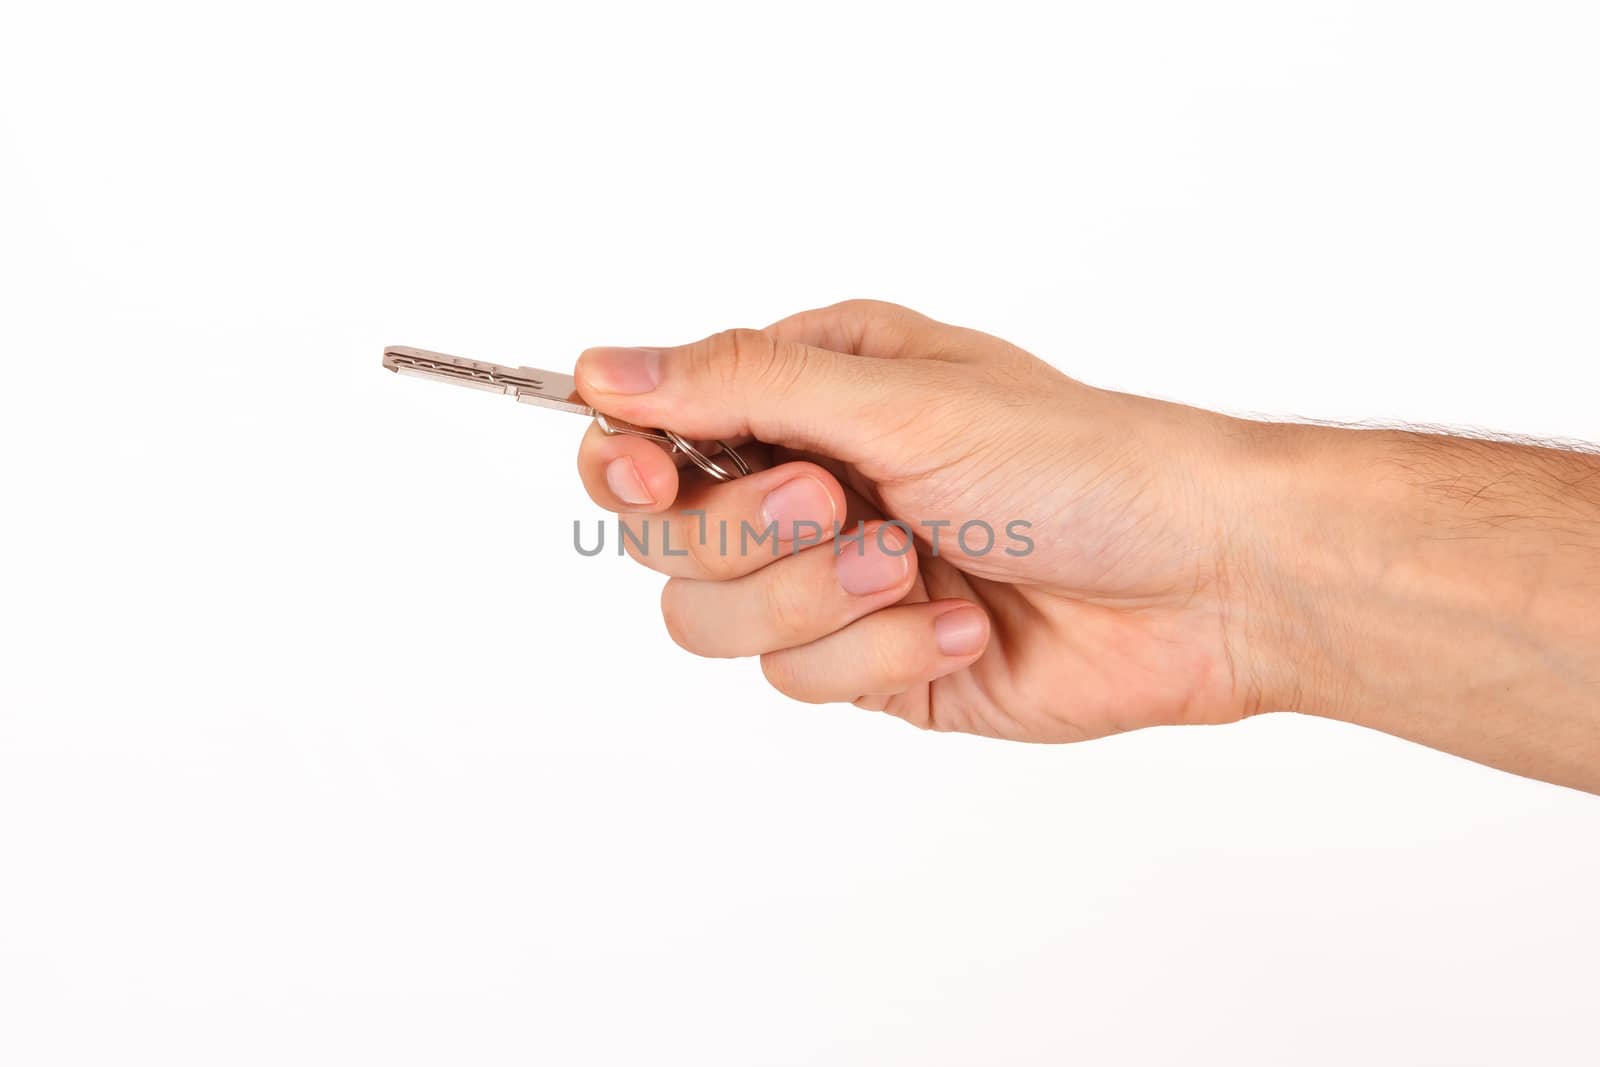 Human hand and key, isolated on white background.